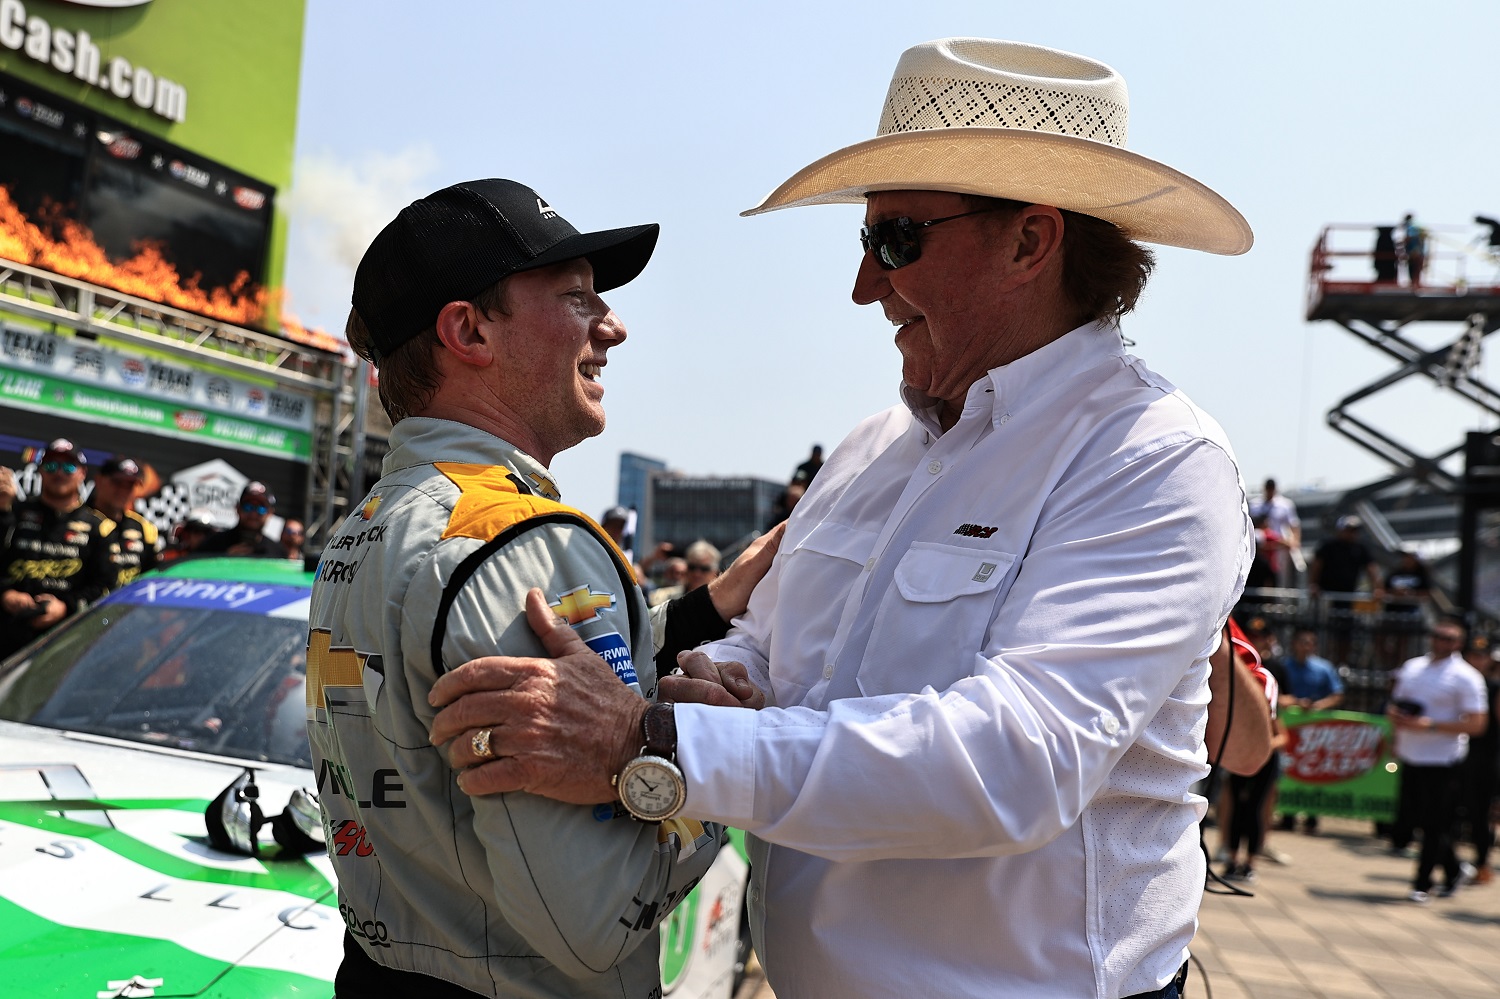 Tyler Reddick is congratulated by RCR team owner Richard Childress after winning  the NASCAR Xfinity Series SRS Distribution 250 at Texas Motor Speedway on May 21, 2022 in Fort Worth, Texas. | Buda Mendes/Getty Images